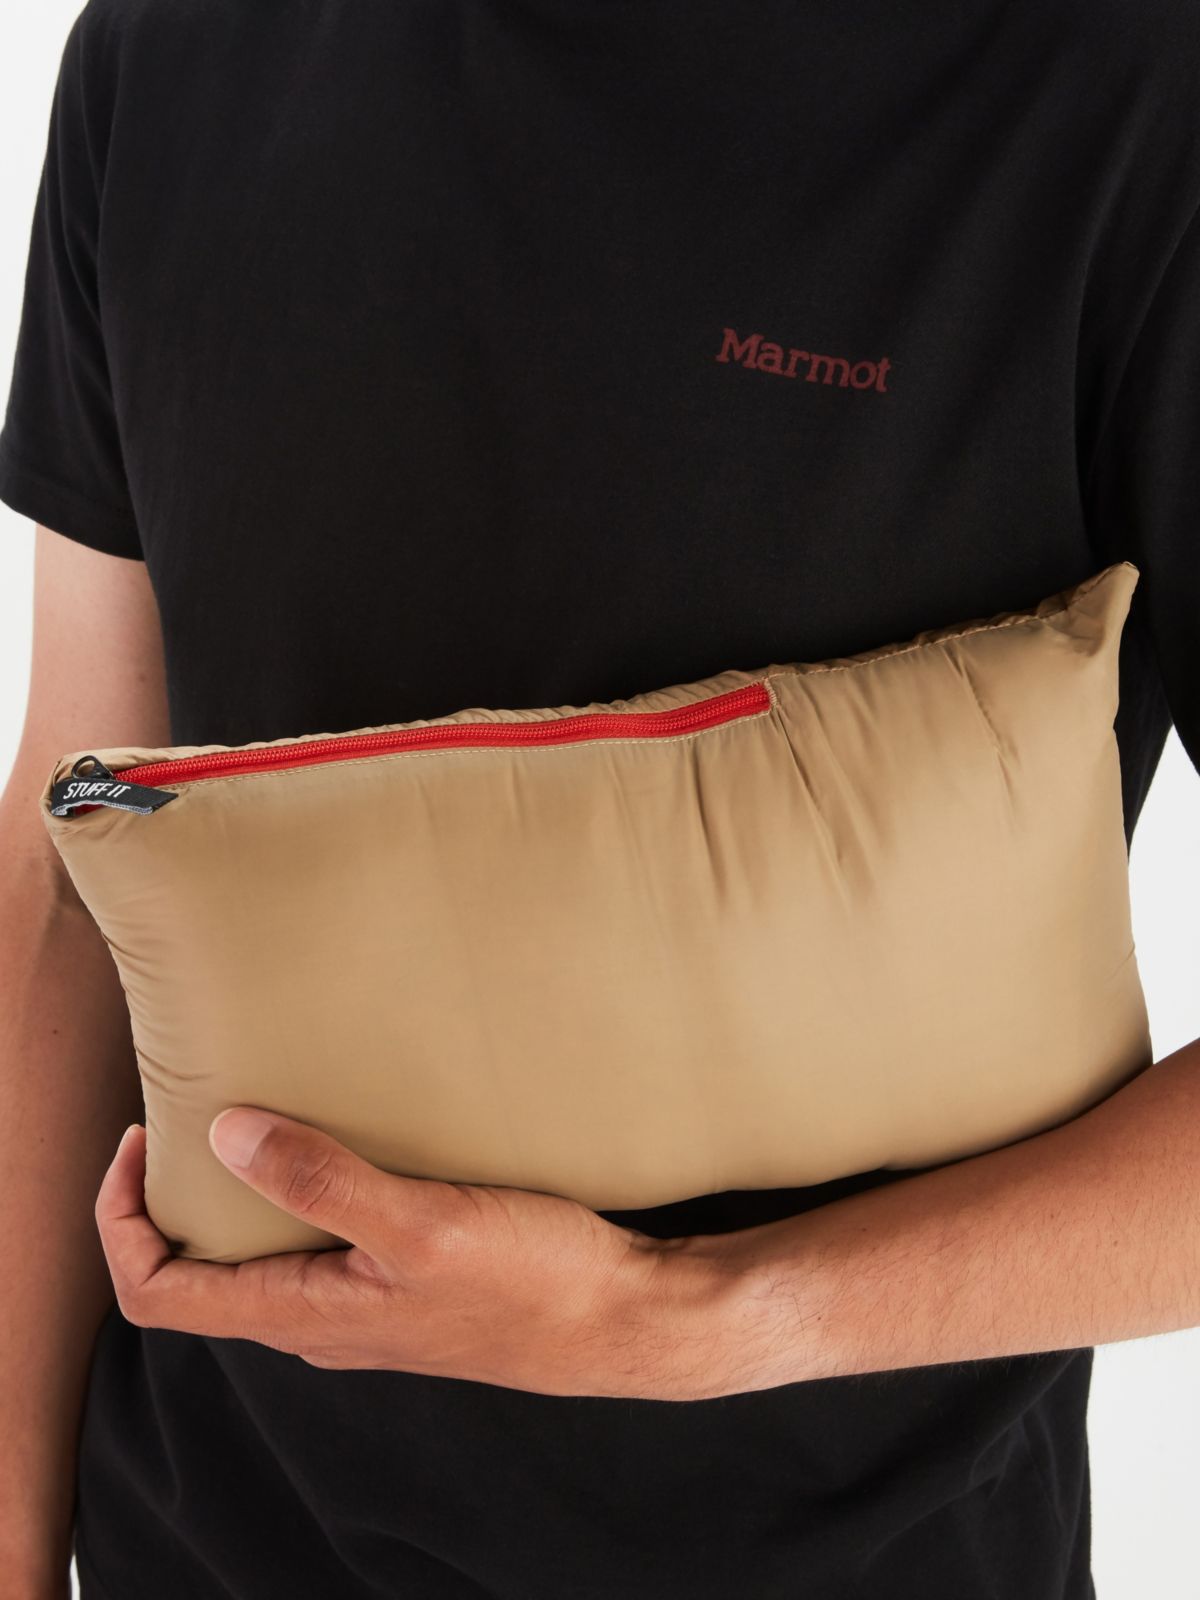 model in t shirt holding a portable pouch